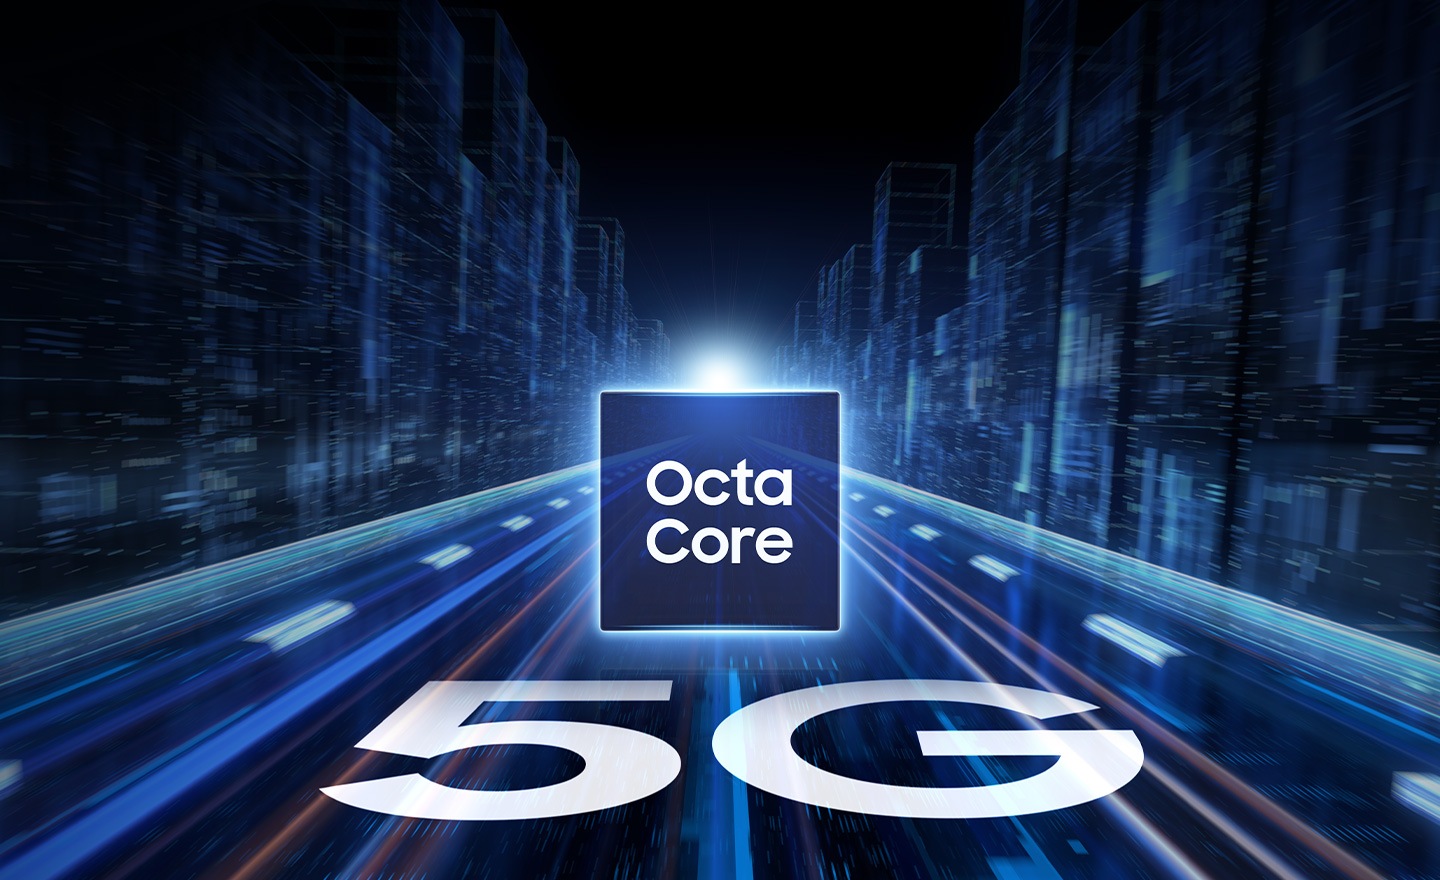 At the center, the text  'Octa Core' is shown. Around it are rays and beams of light that resemble a highway and below the square is the text '5G' shown slanted as if on the highway.